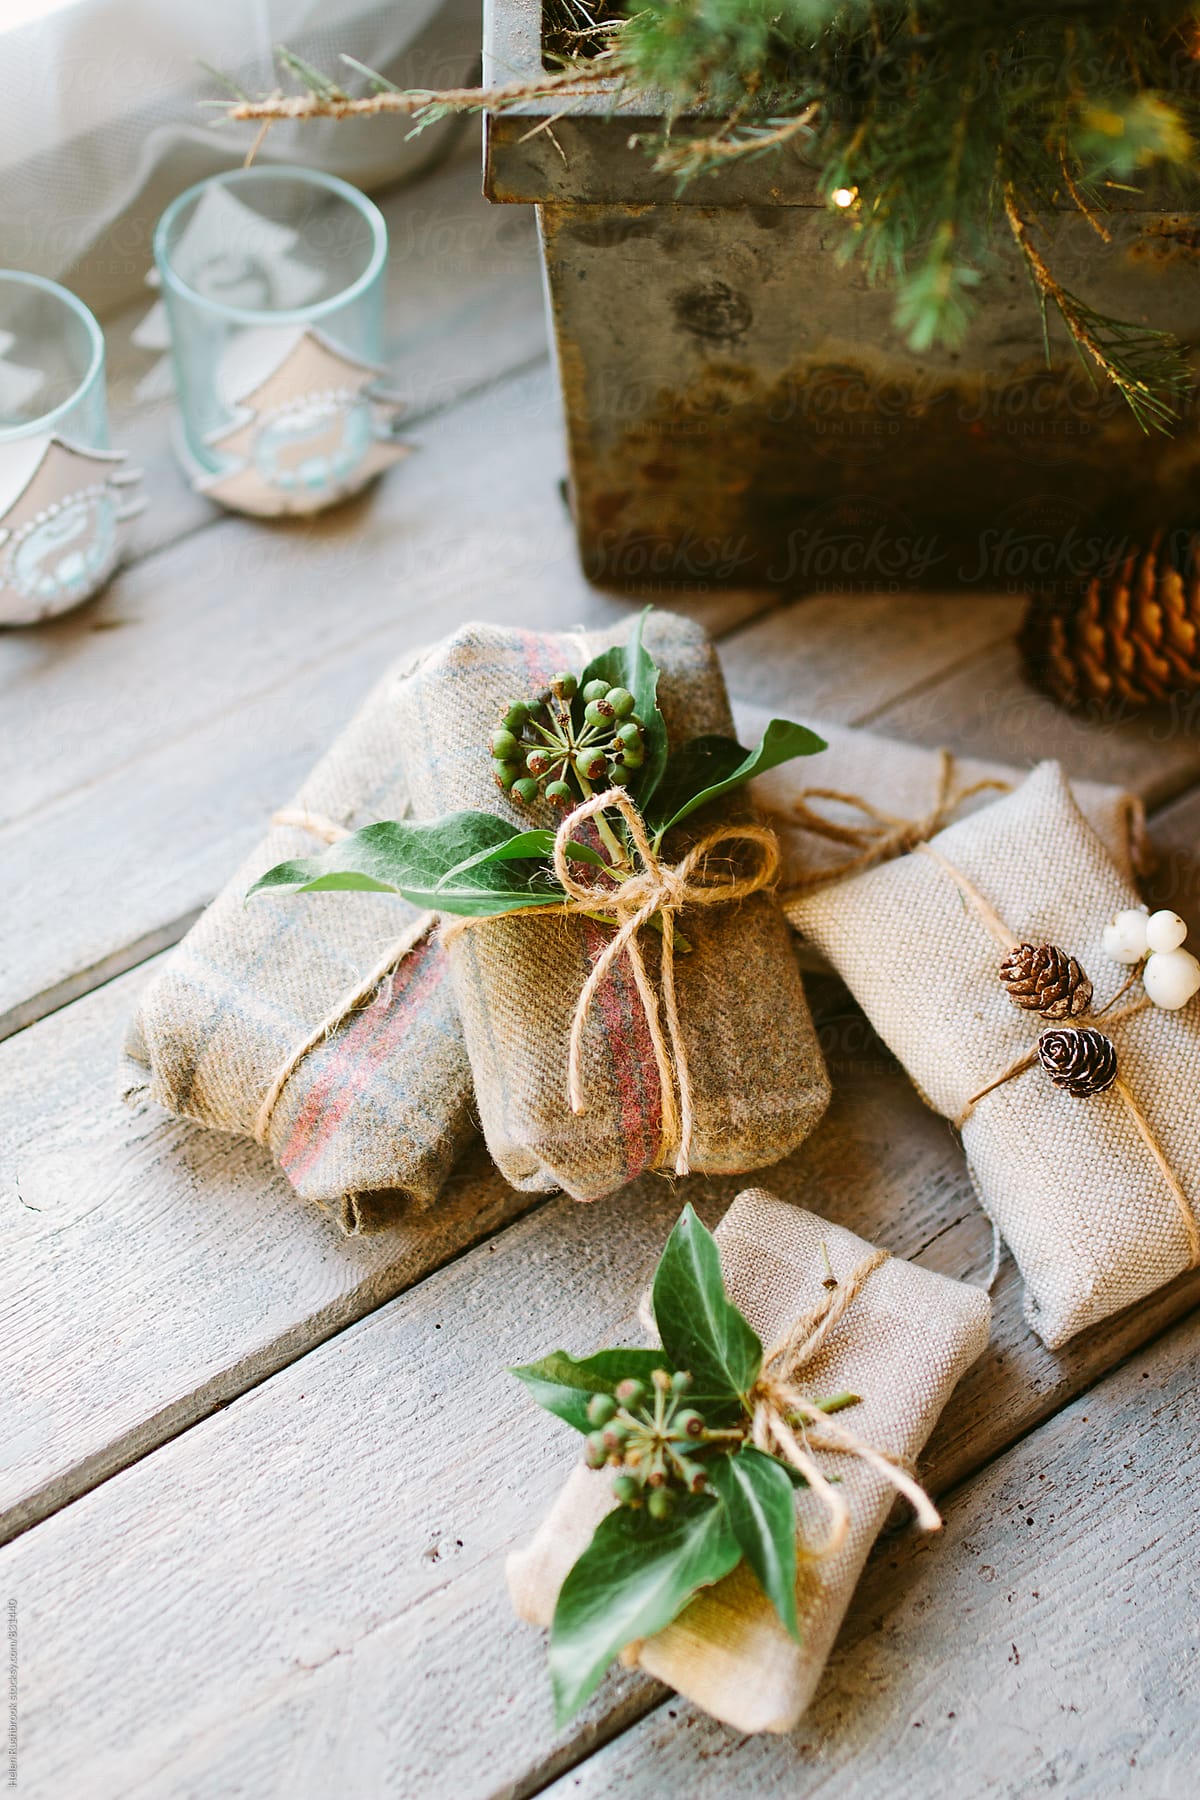 Linen and tartan-wrapped gifts under a Christmas tree